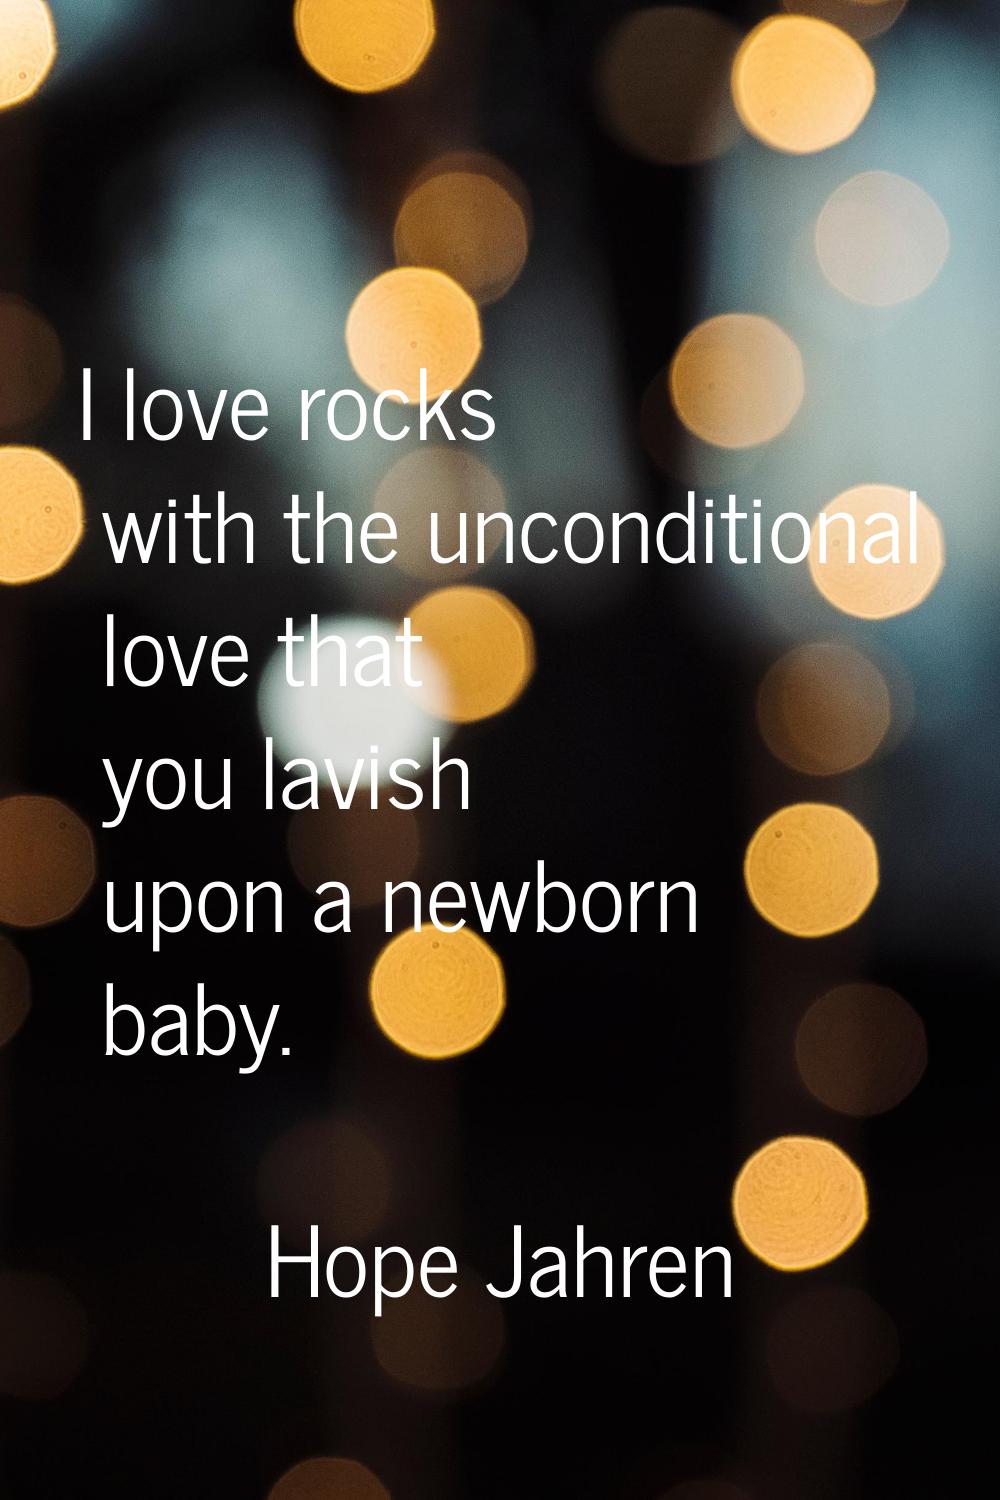 I love rocks with the unconditional love that you lavish upon a newborn baby.